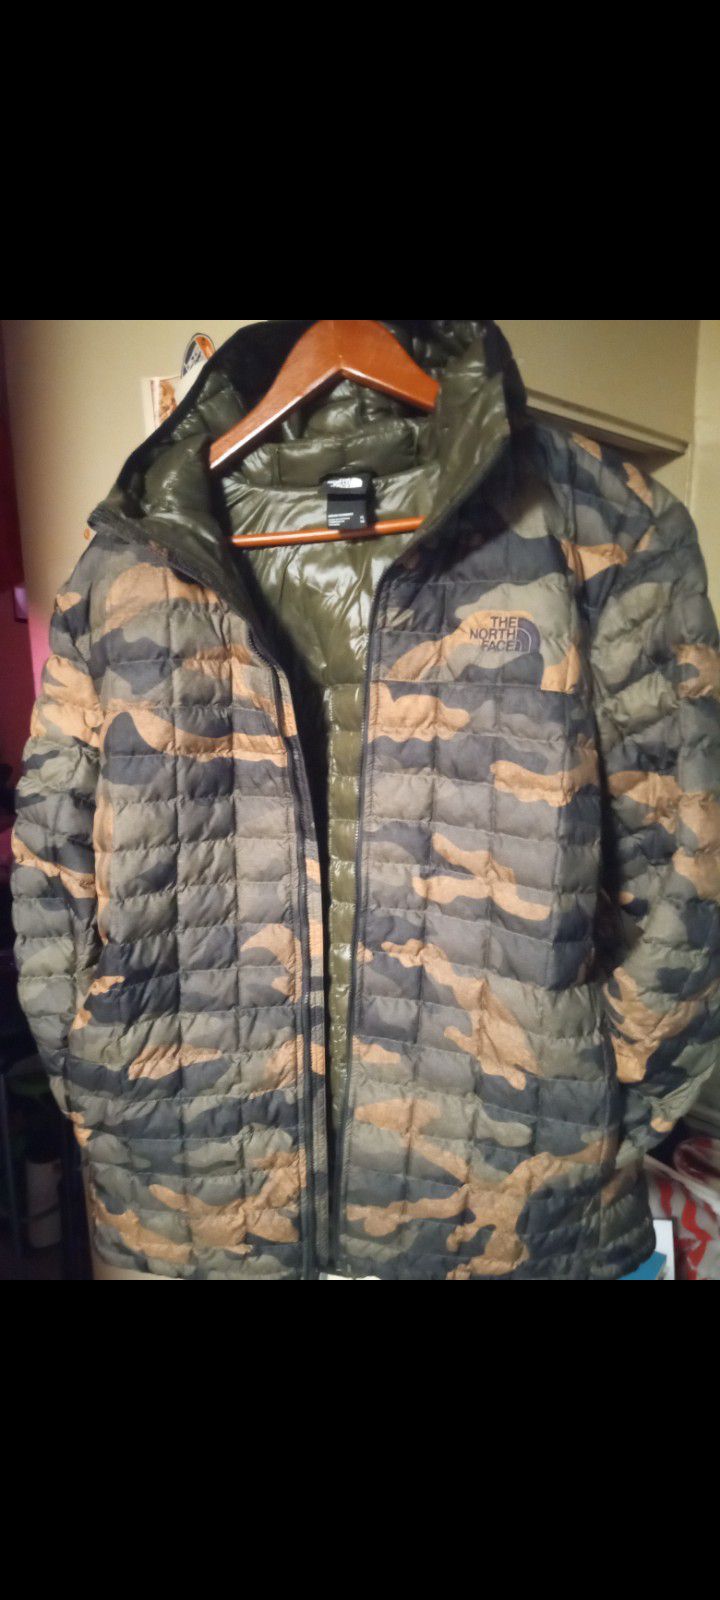 North Face Army Fatigue Jacket XL $355 or Vest XL $225 NWT also matching Camo Nike AF1 sneakers Sz 10M or Dub Zero, 6 Rings Jordan Cash & Pick Up only